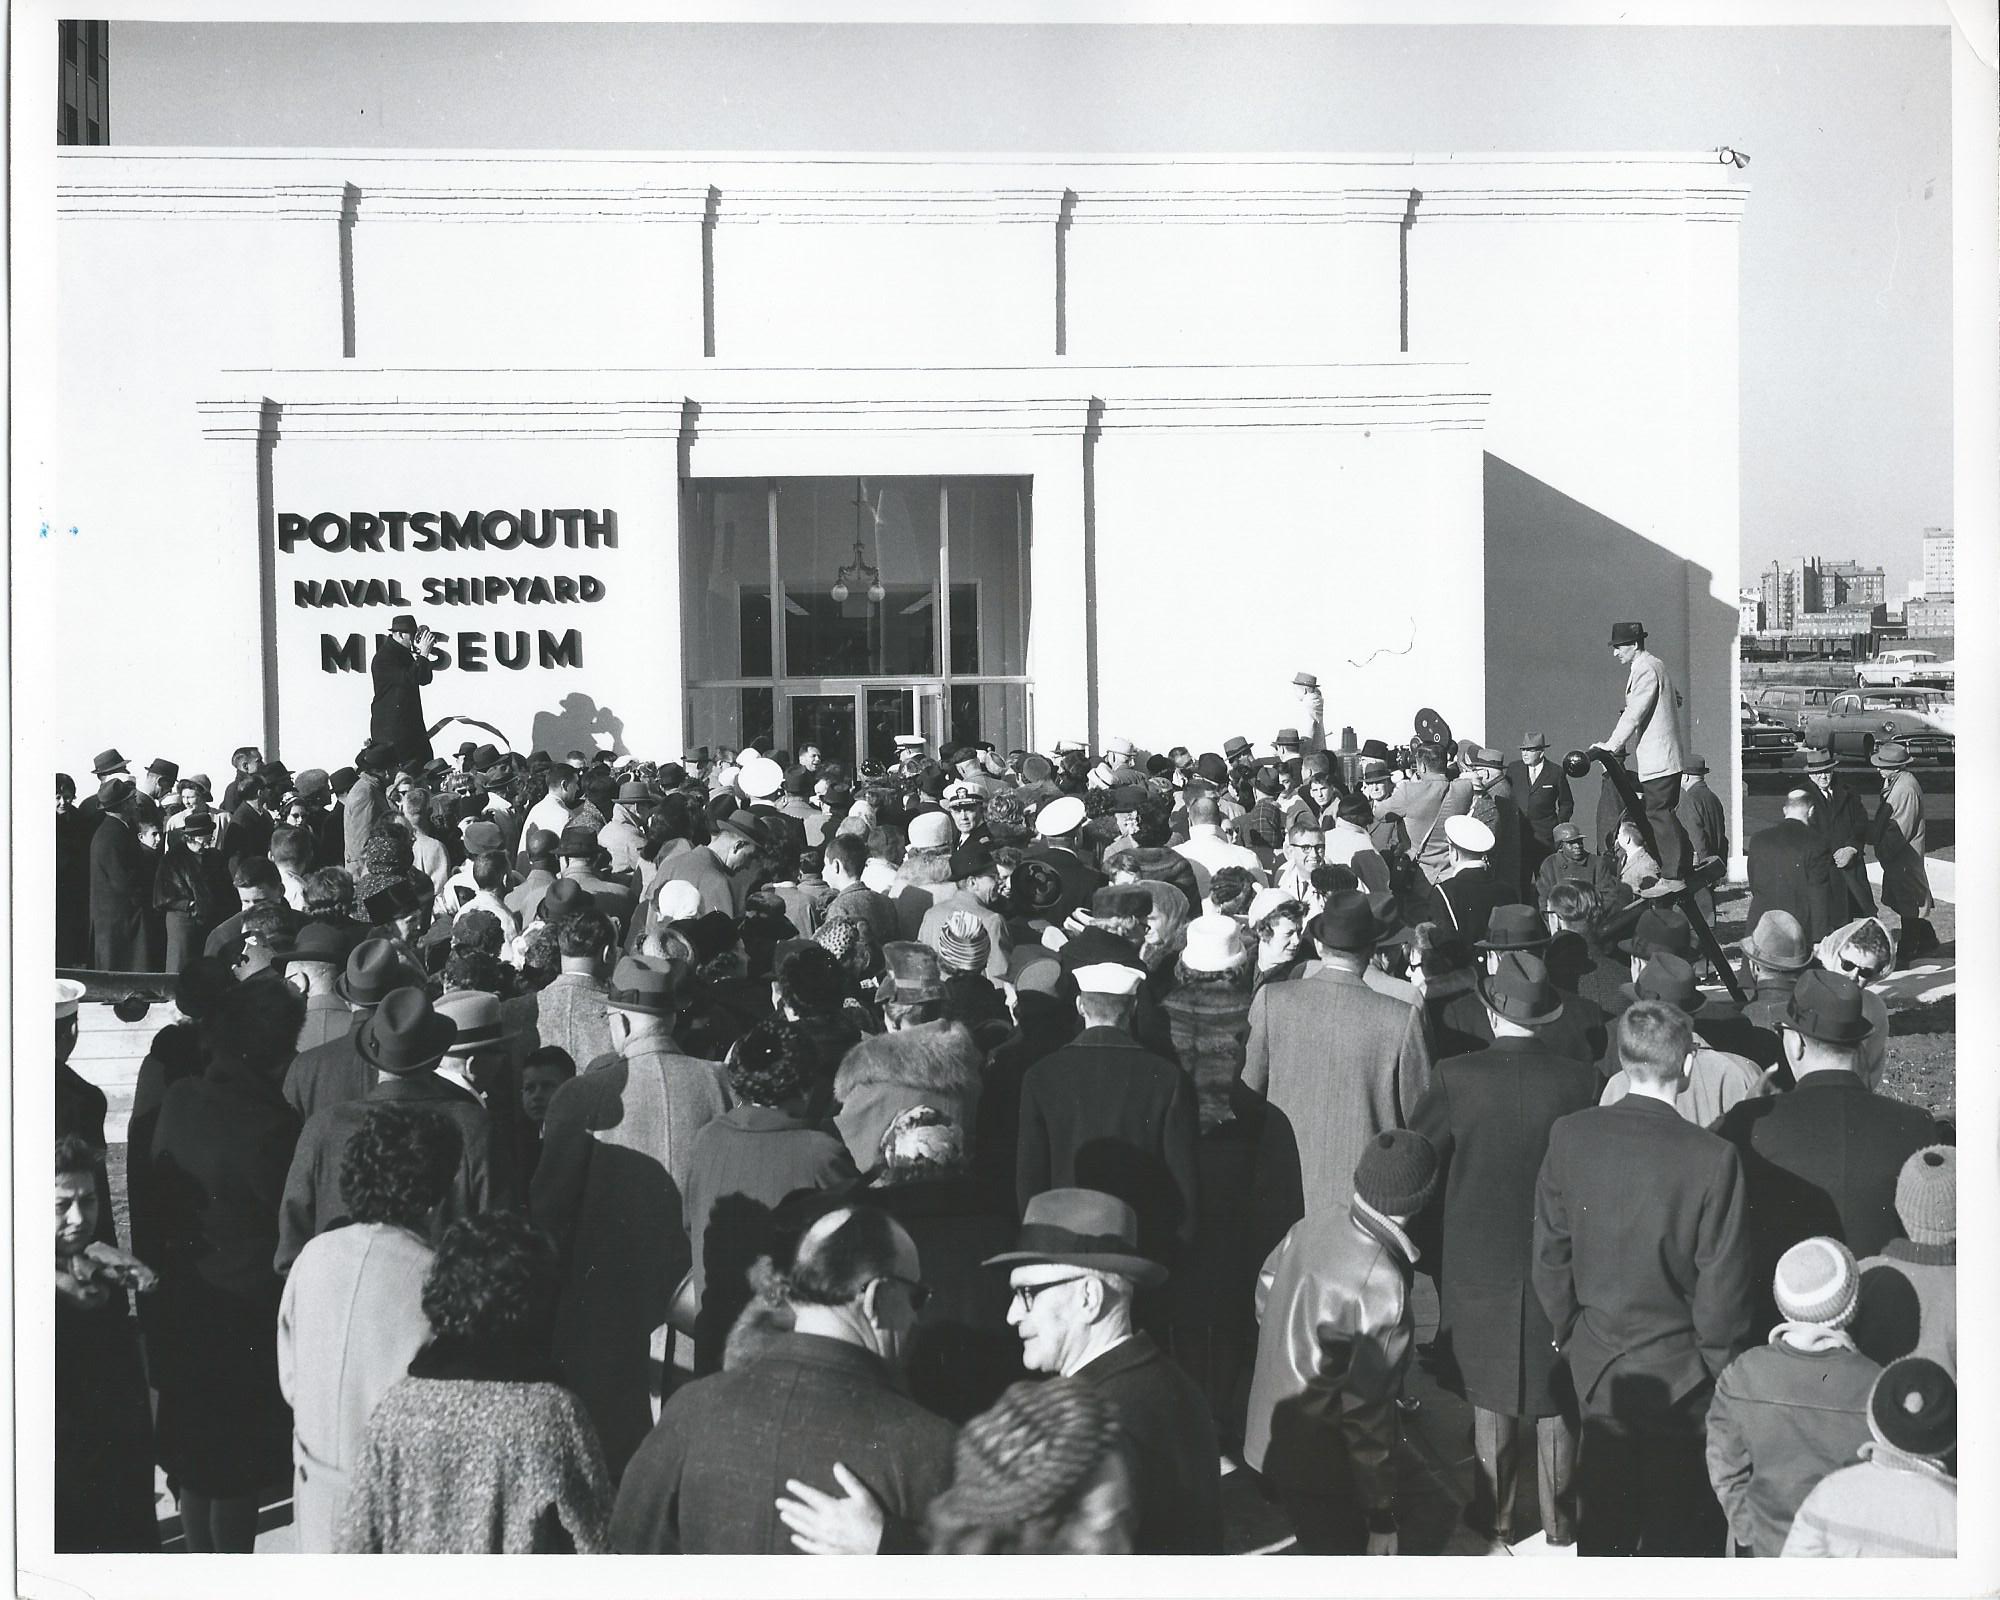 Opening Day of the Naval Shipyard Museum on Jan 27 1963